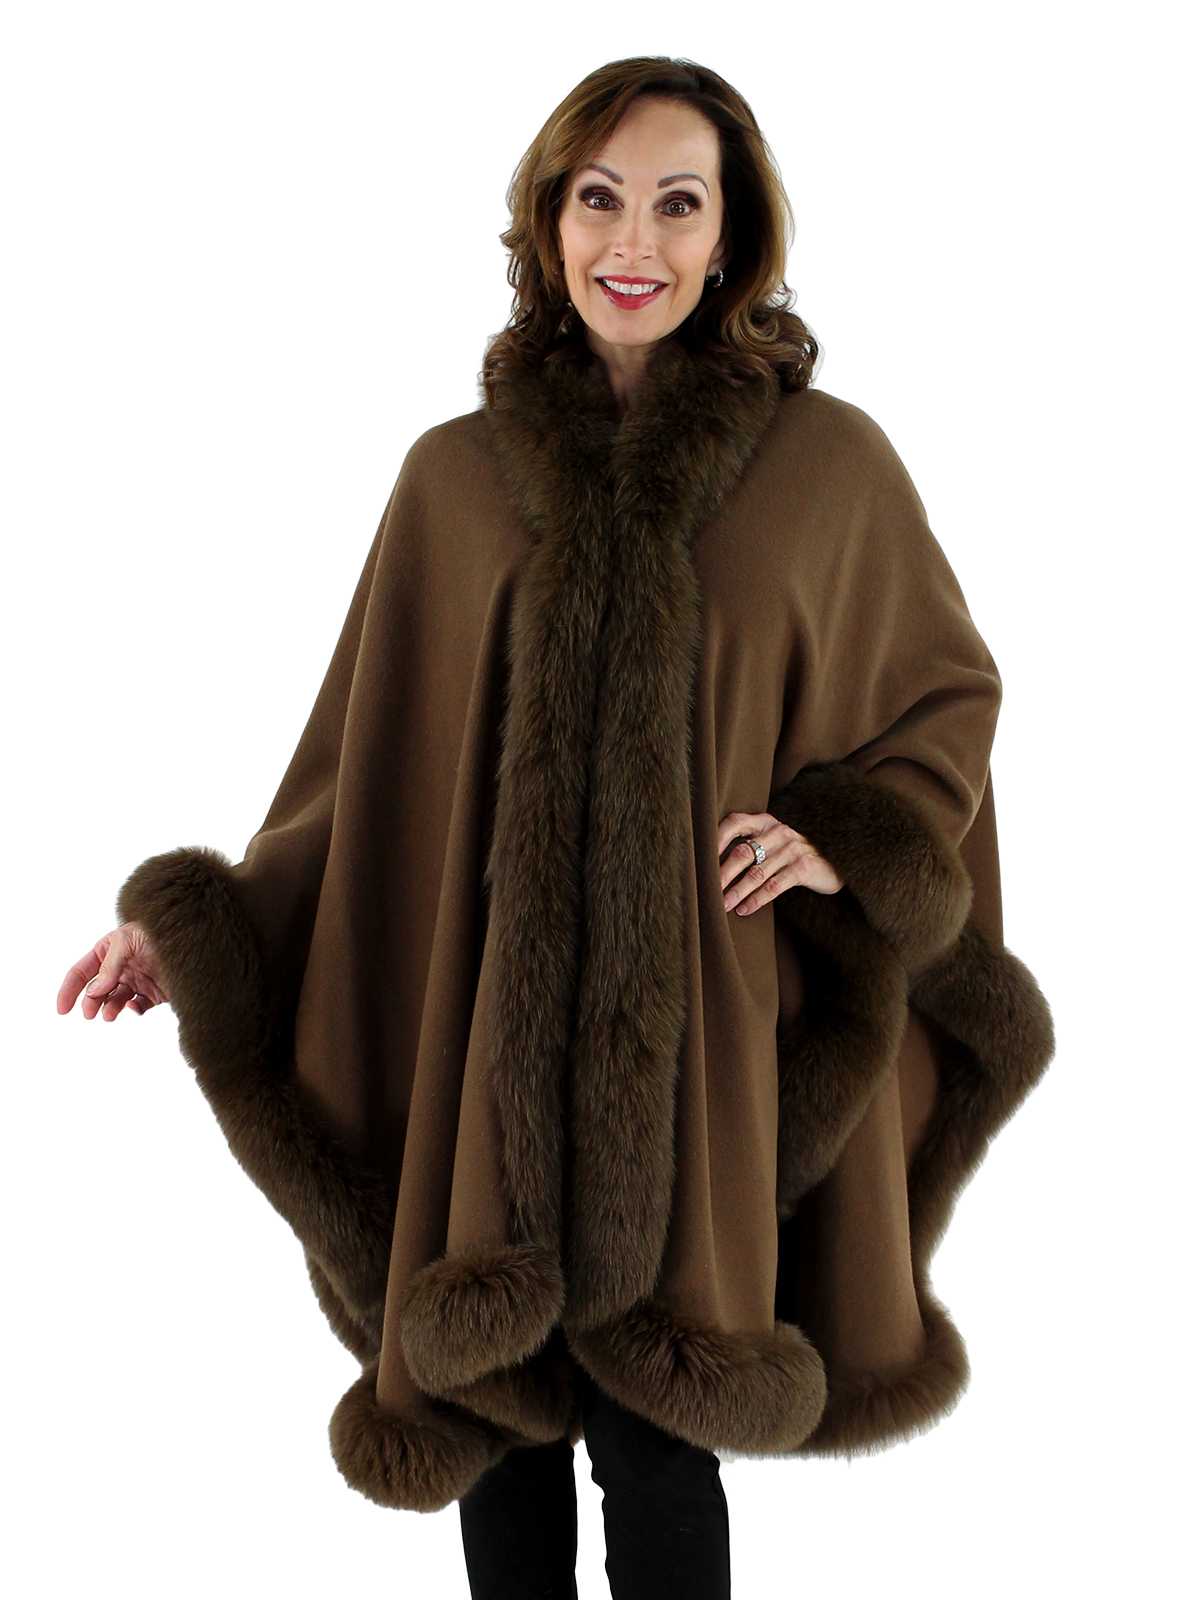 Brown Wool Cape with Fox Fur Trim - Women's Wool Cape - One Size Fits